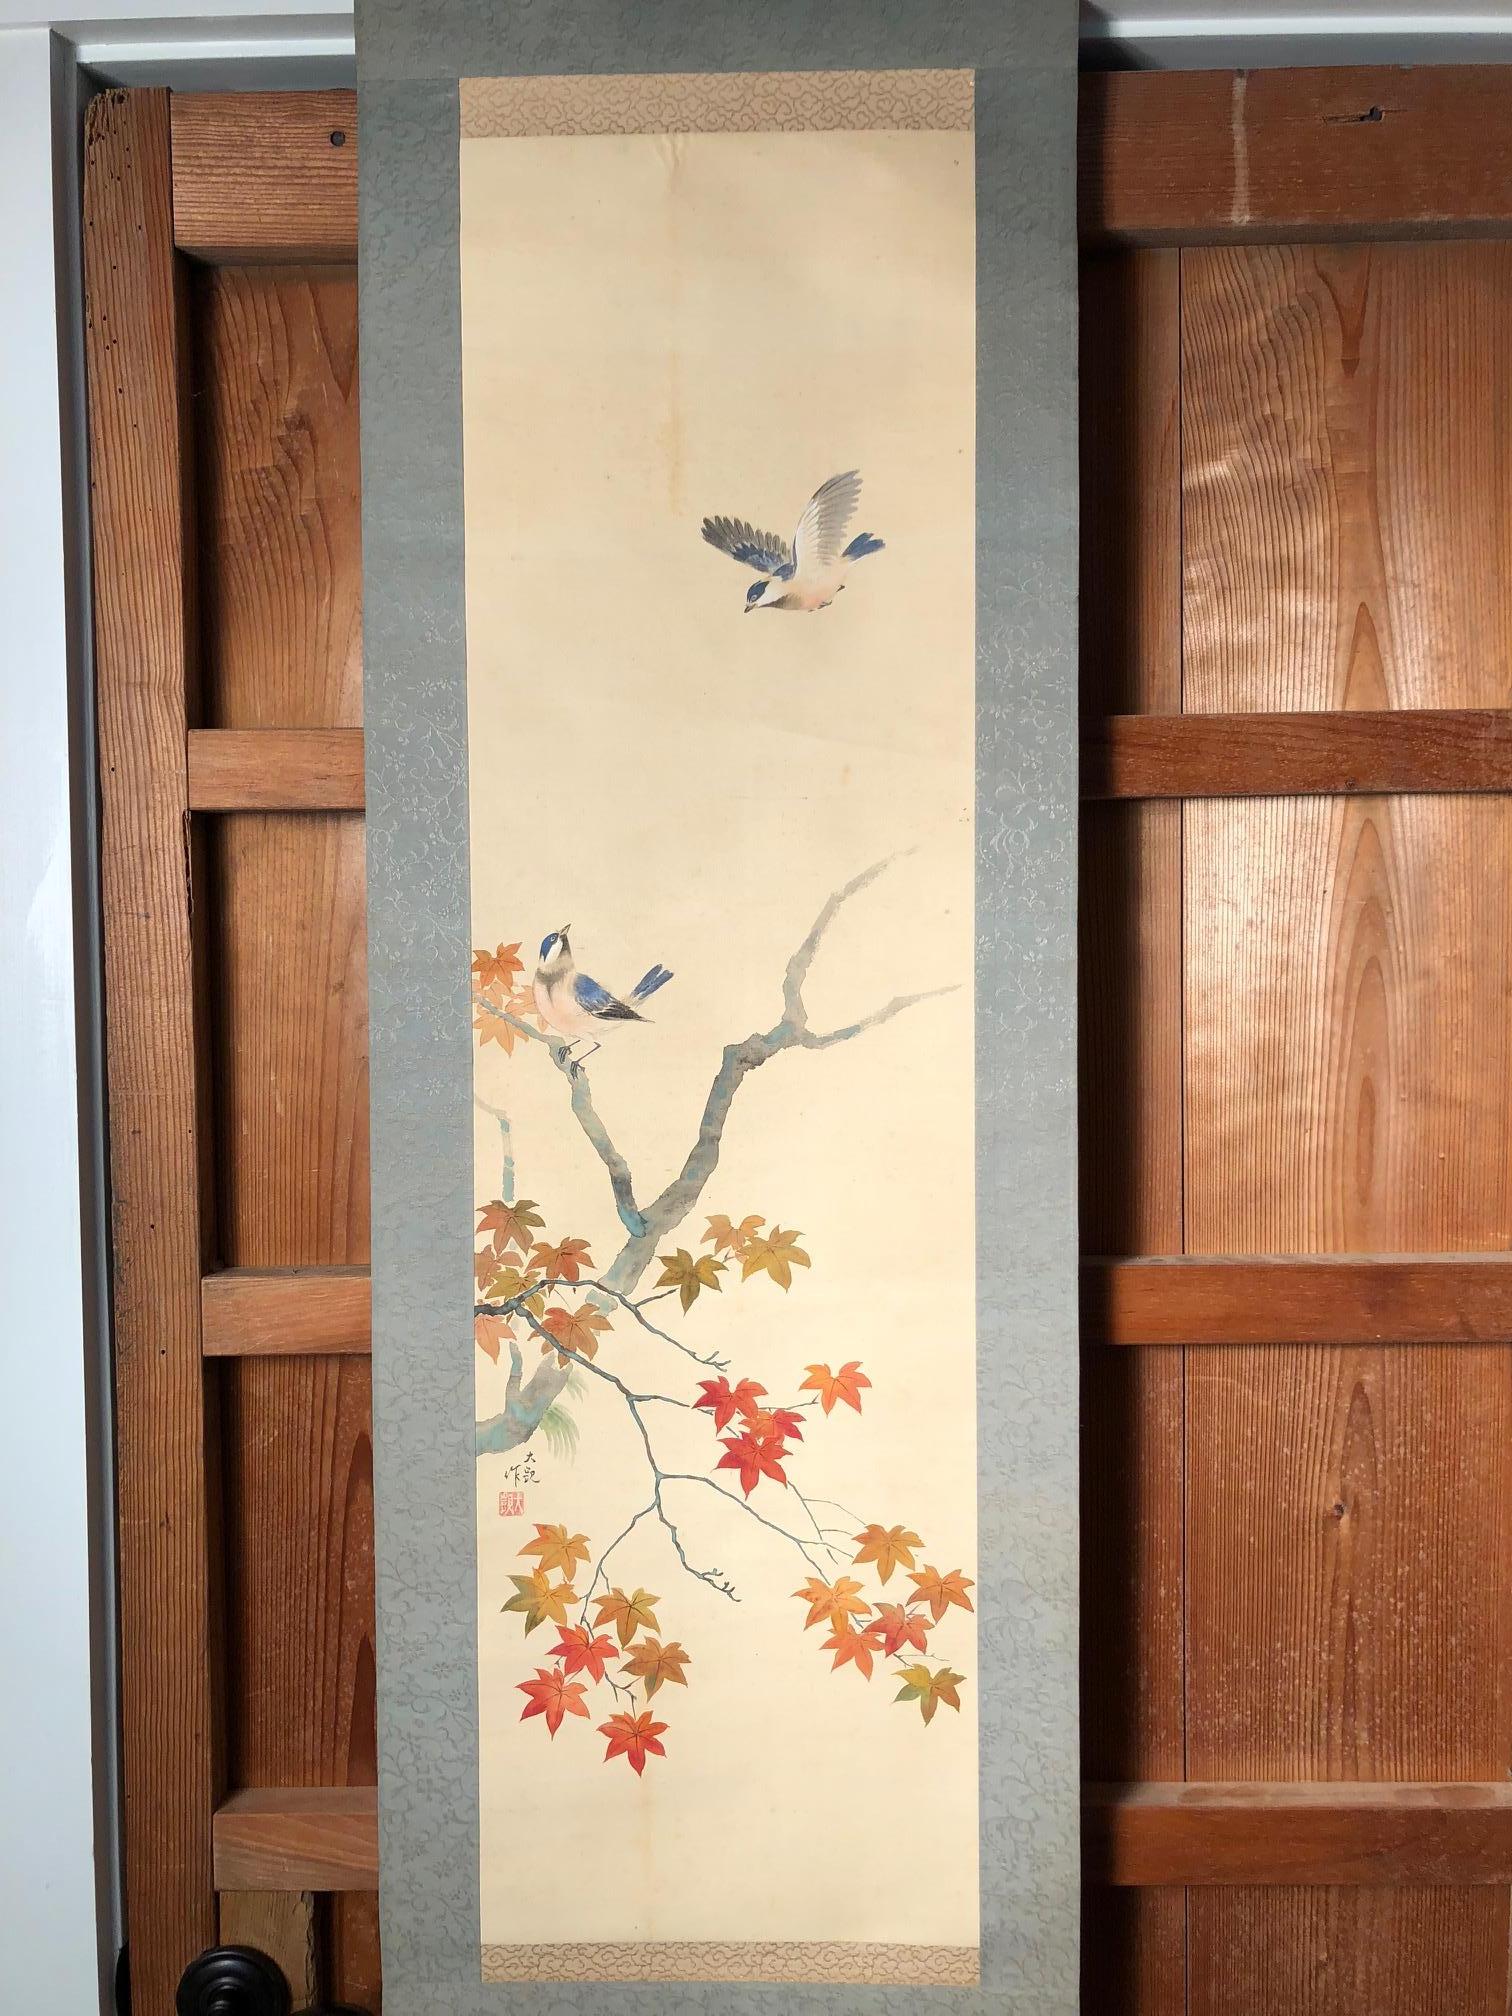 Taisho Blue Birds and Maples Japanese Antique Hand-Painted Silk Scroll, Meiji Period